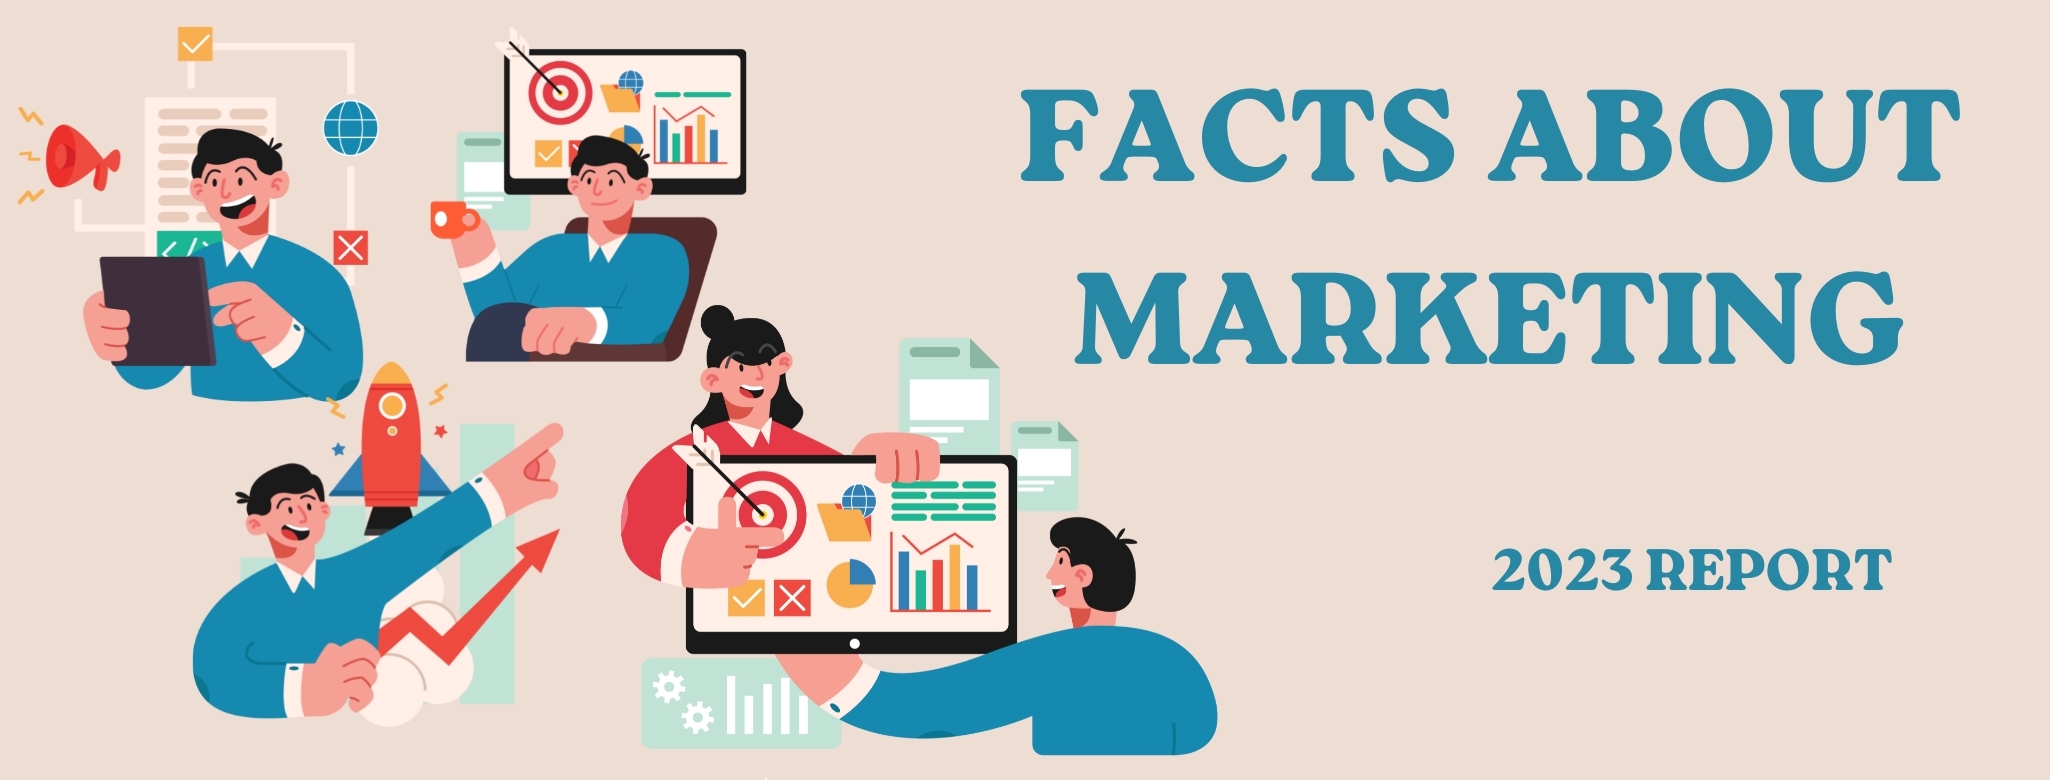 facts about marketing